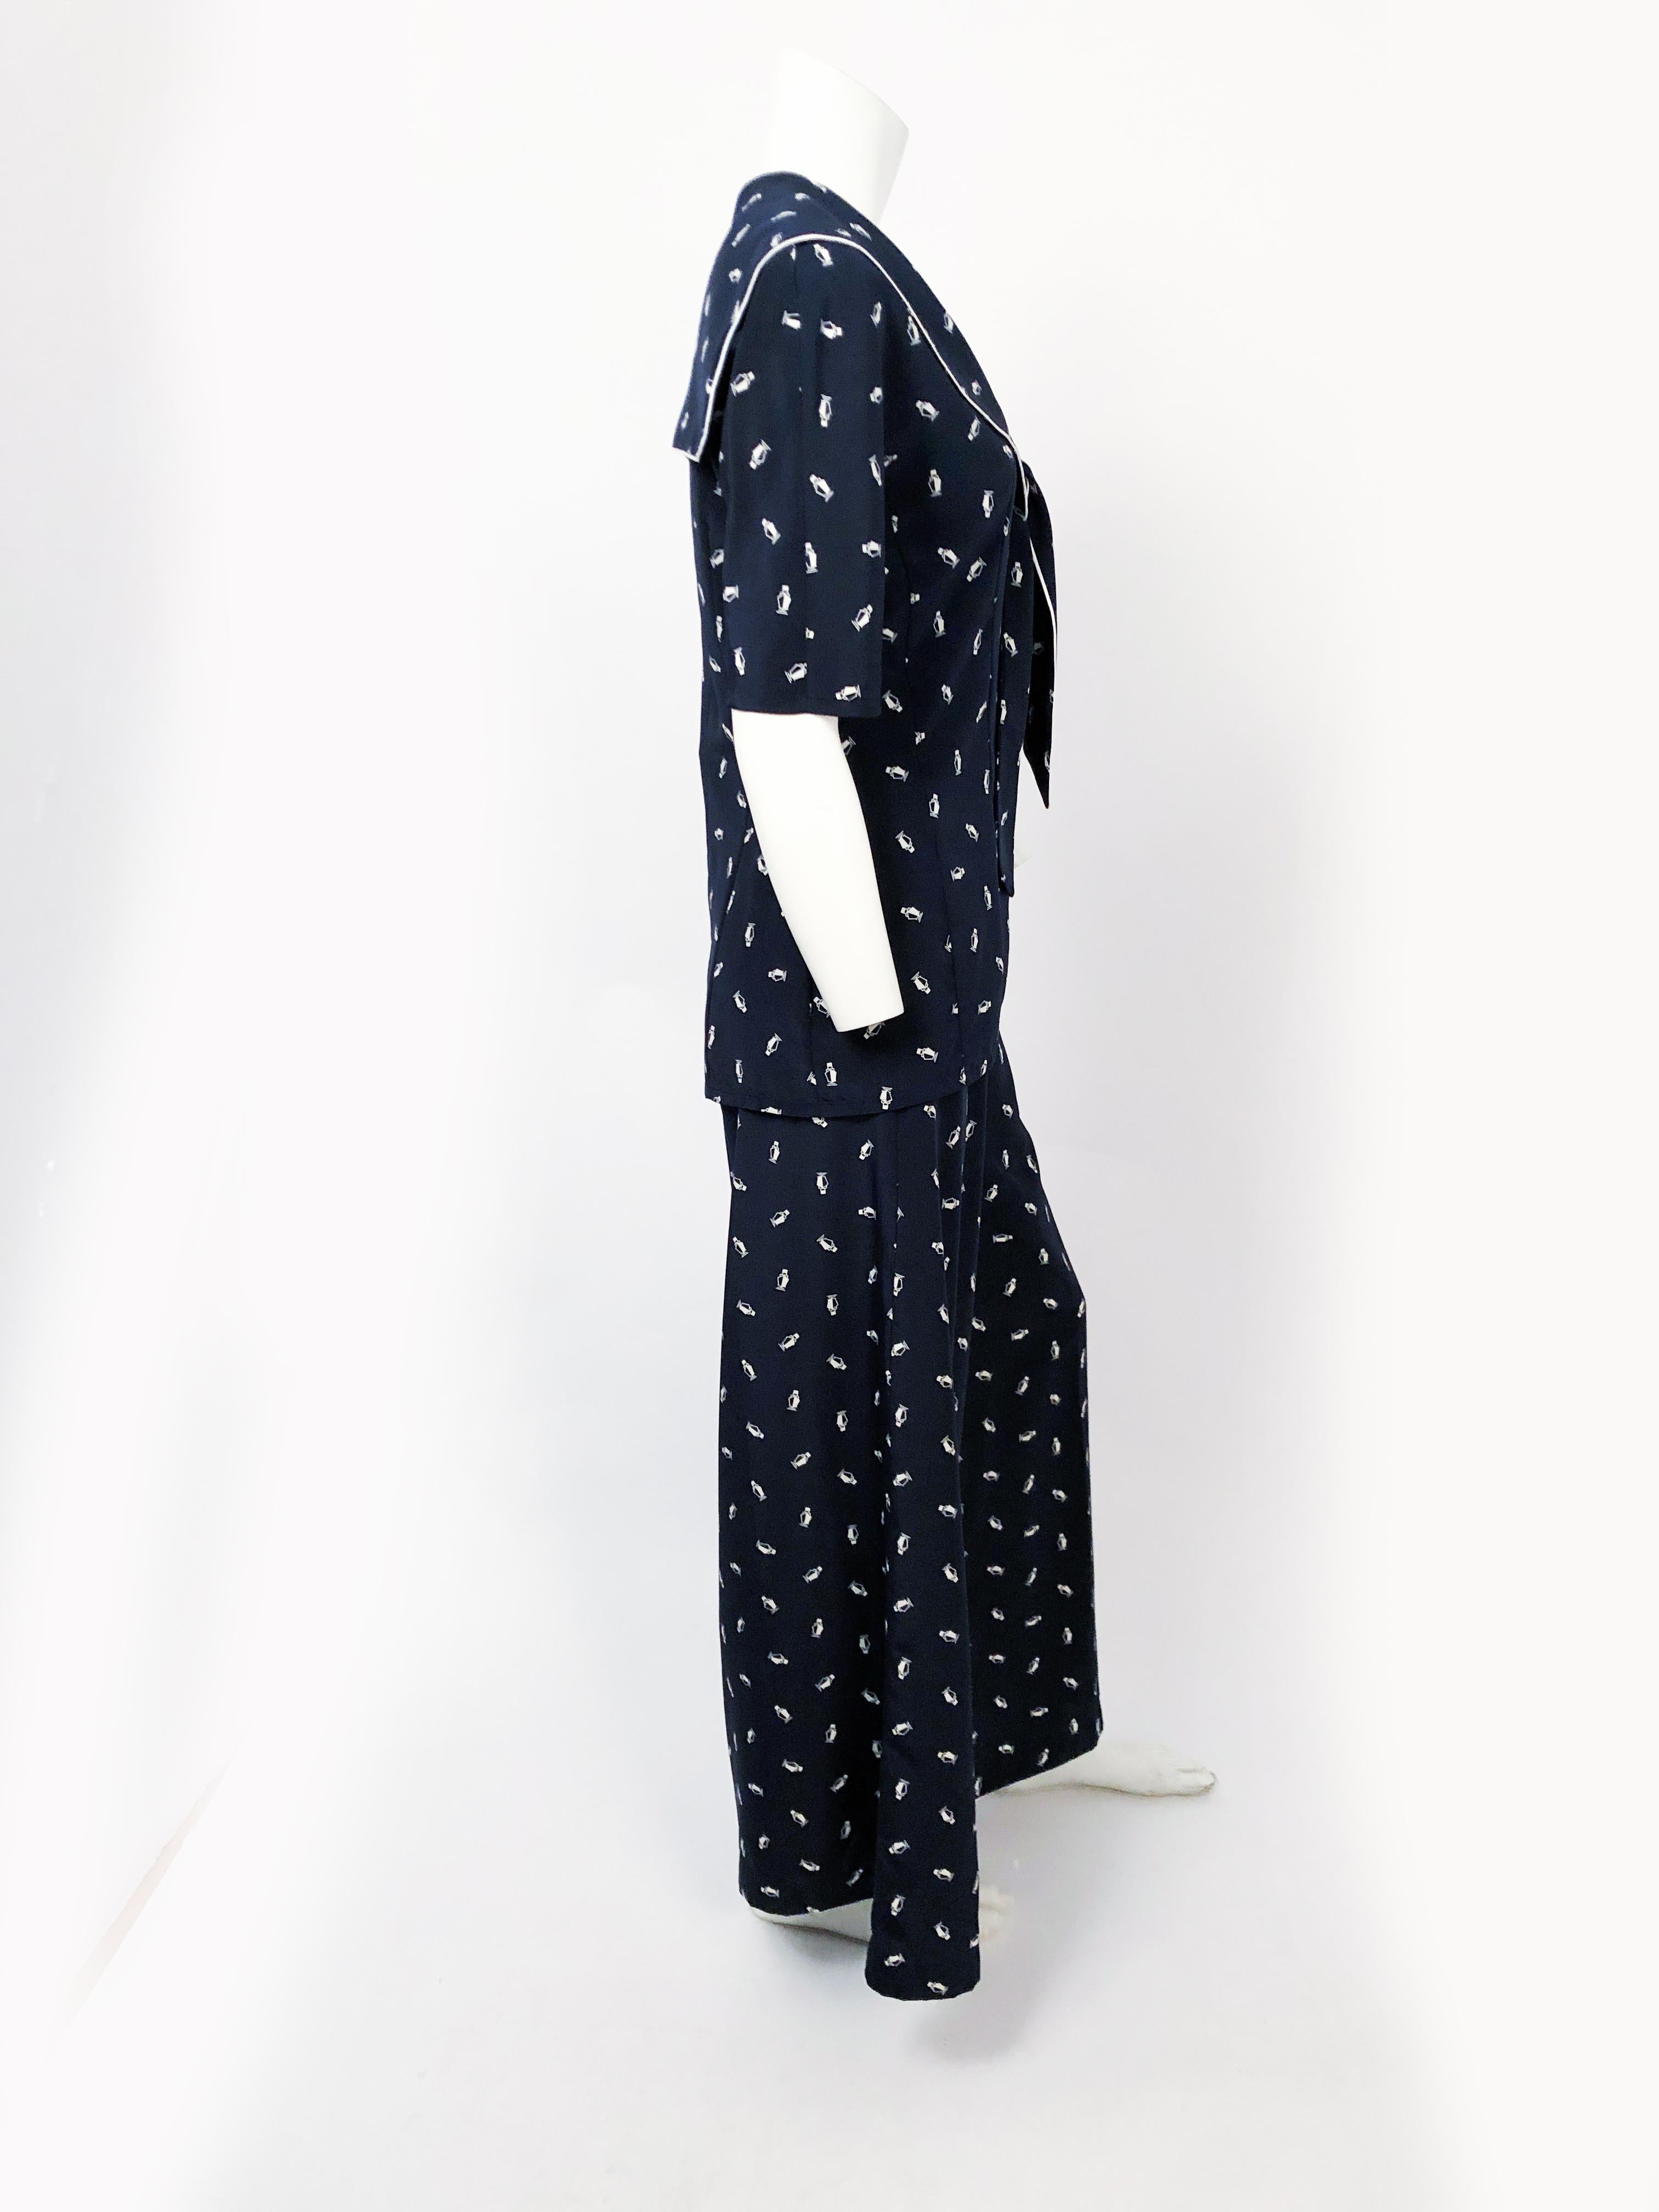 Navy and White 3-Piece Set (Top, pants, and belt) with Steam Boat Print, high-waist pants, wide legs, sailor tie collar, and whit trim. In the style of the 1930's and 1940's.